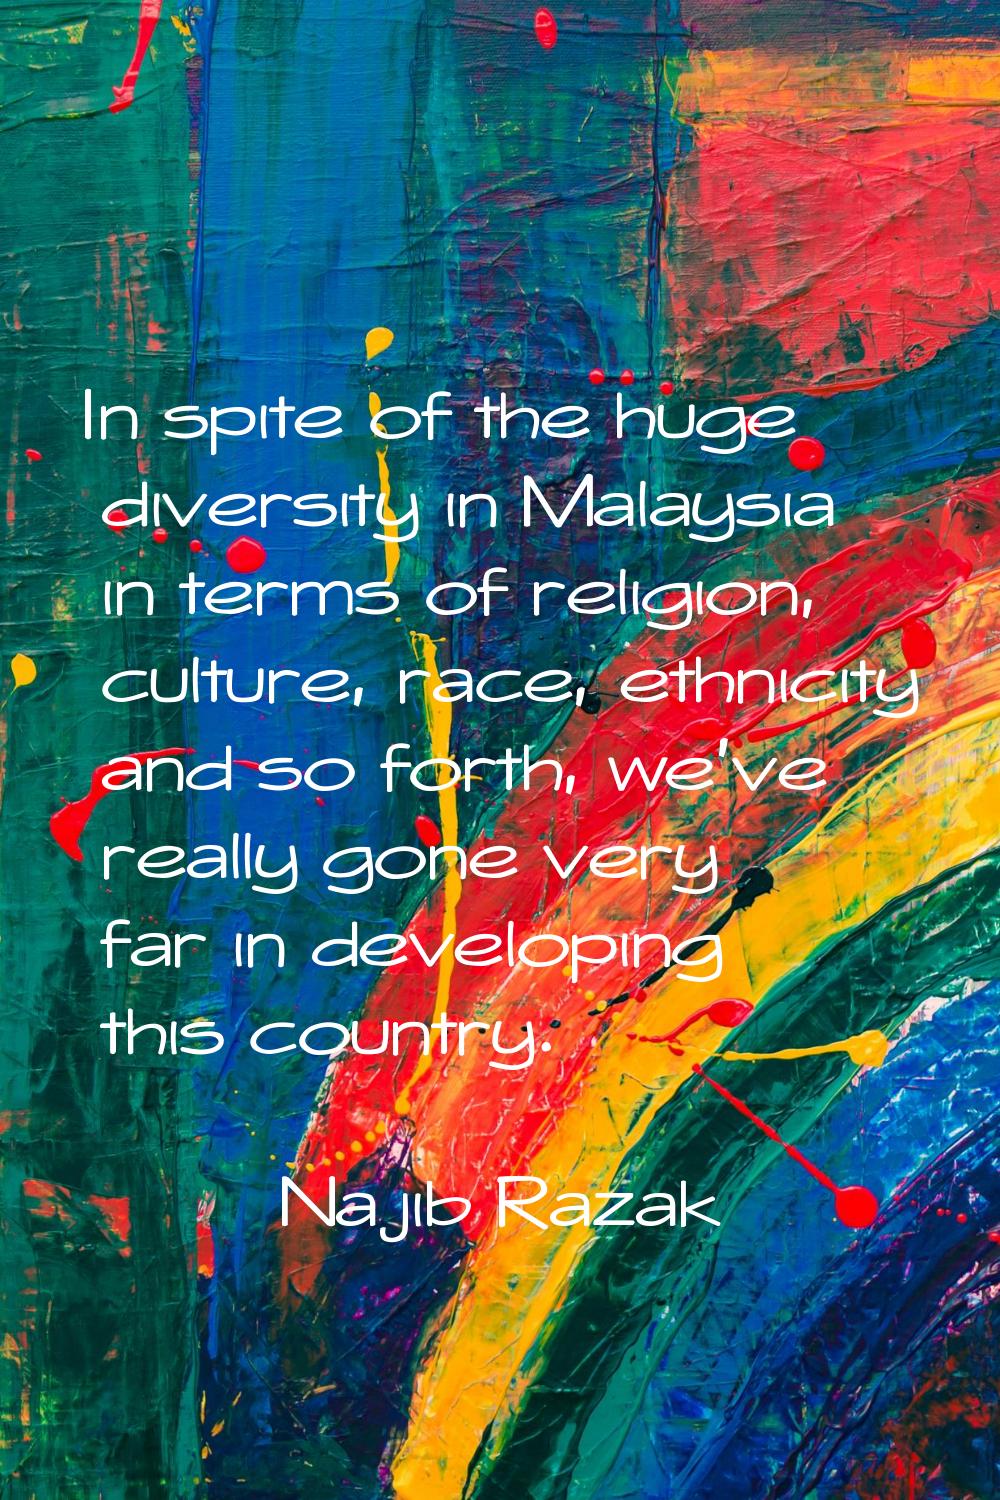 In spite of the huge diversity in Malaysia in terms of religion, culture, race, ethnicity and so fo